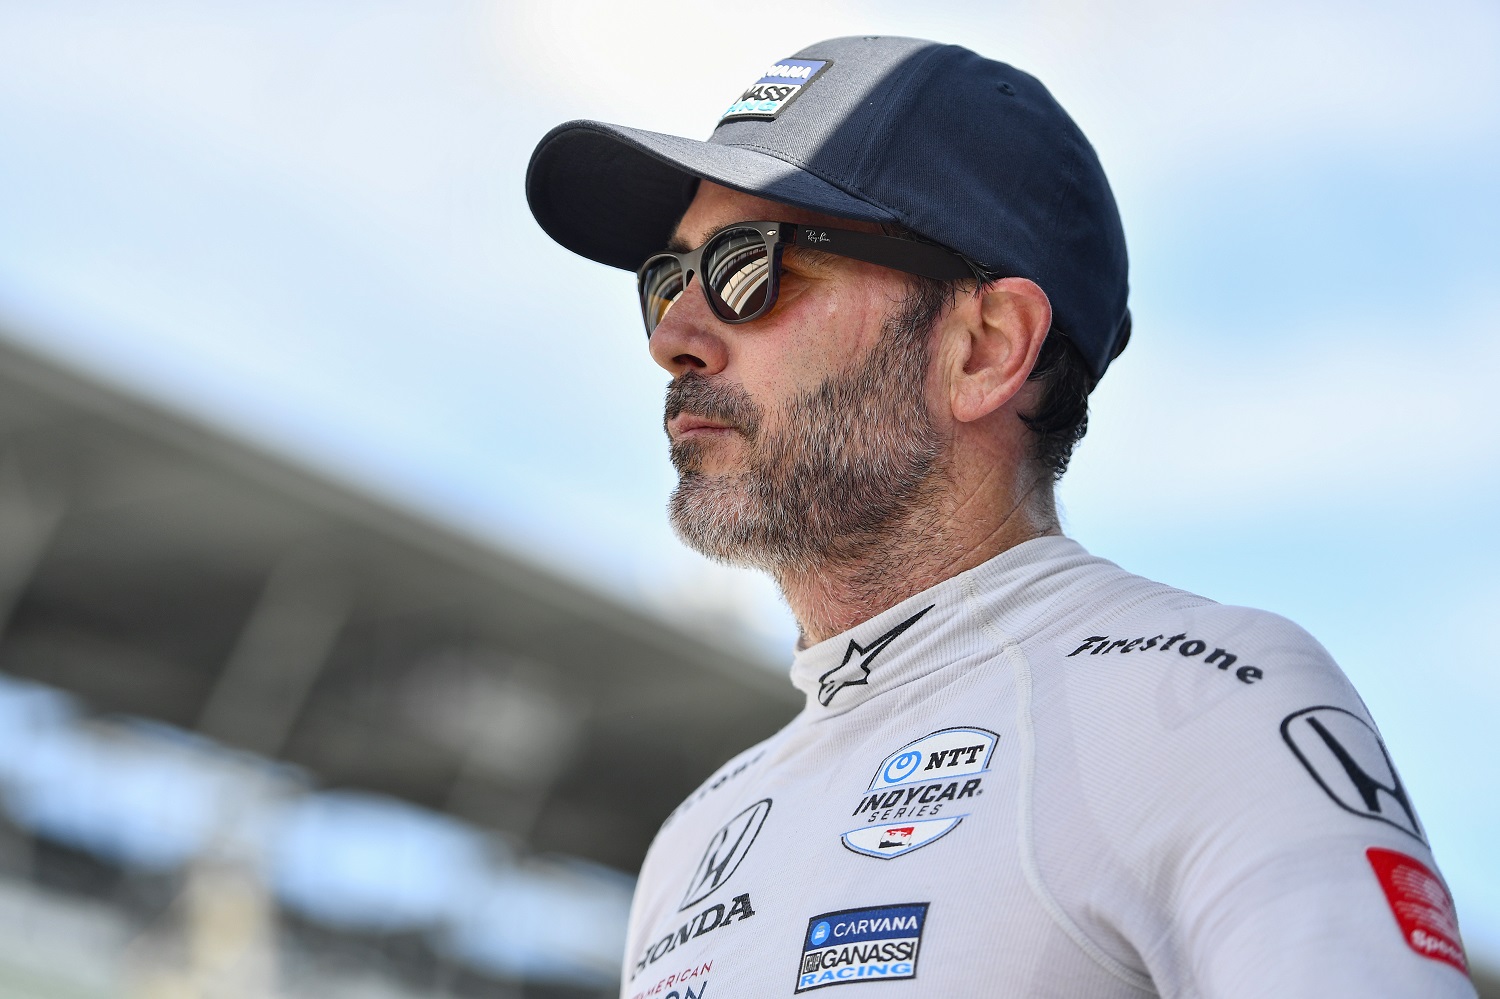 Jimmie Johnson looks on during practice for the NTT IndyCar Series Gallagher Grand Prix at Indianapolis Motor Speedway on July 29, 2022. | Logan Riely/Getty Images